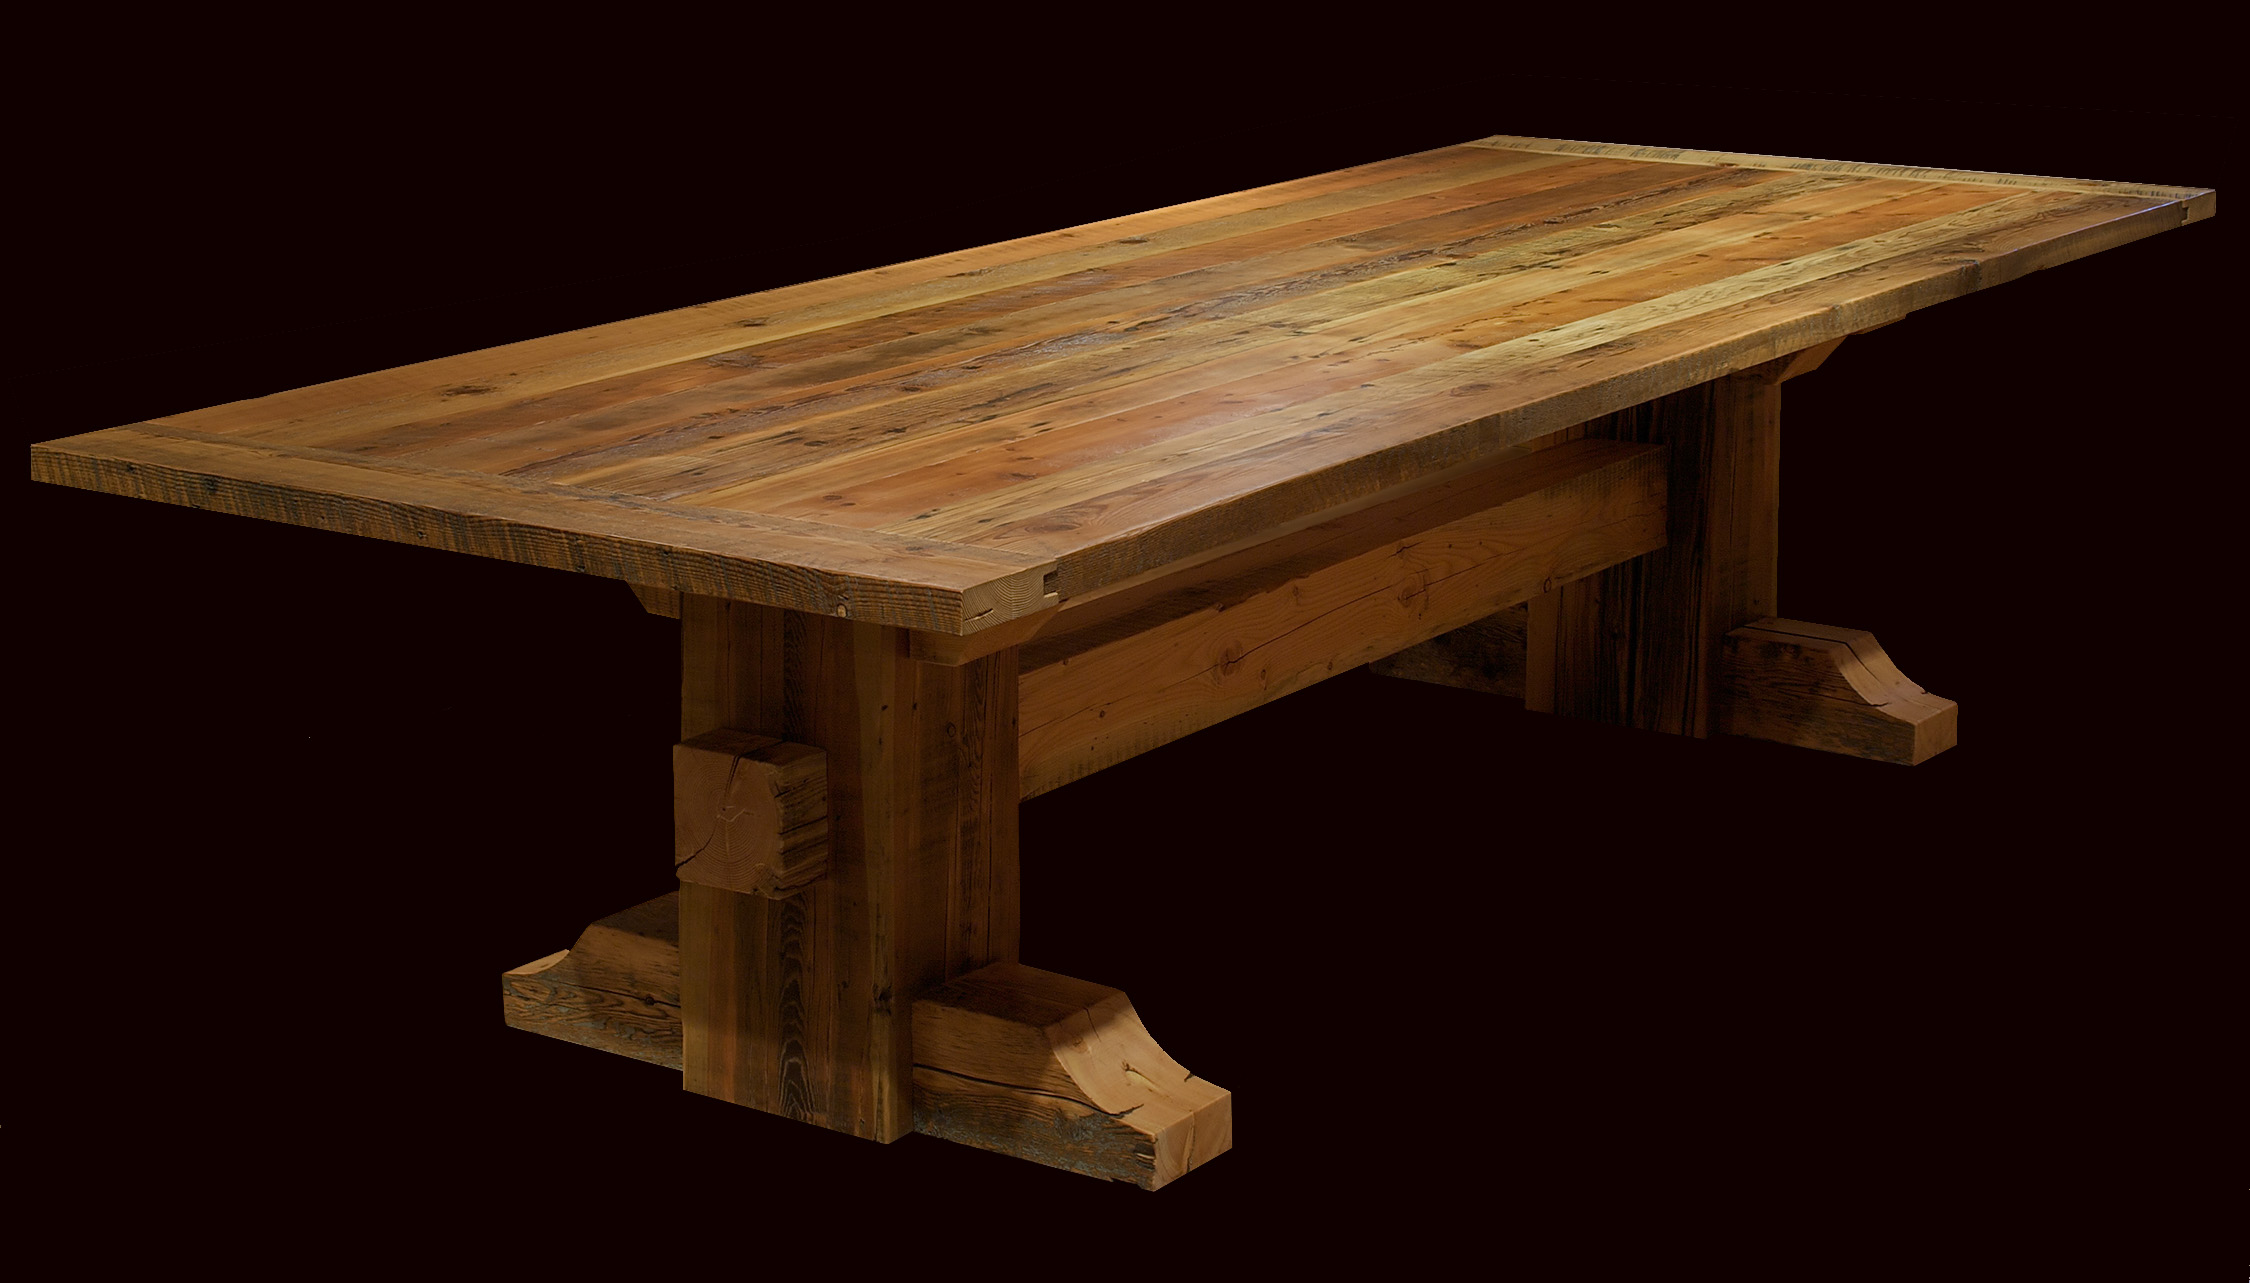 Reclaimed Barnwood Collection rustic furniture builders